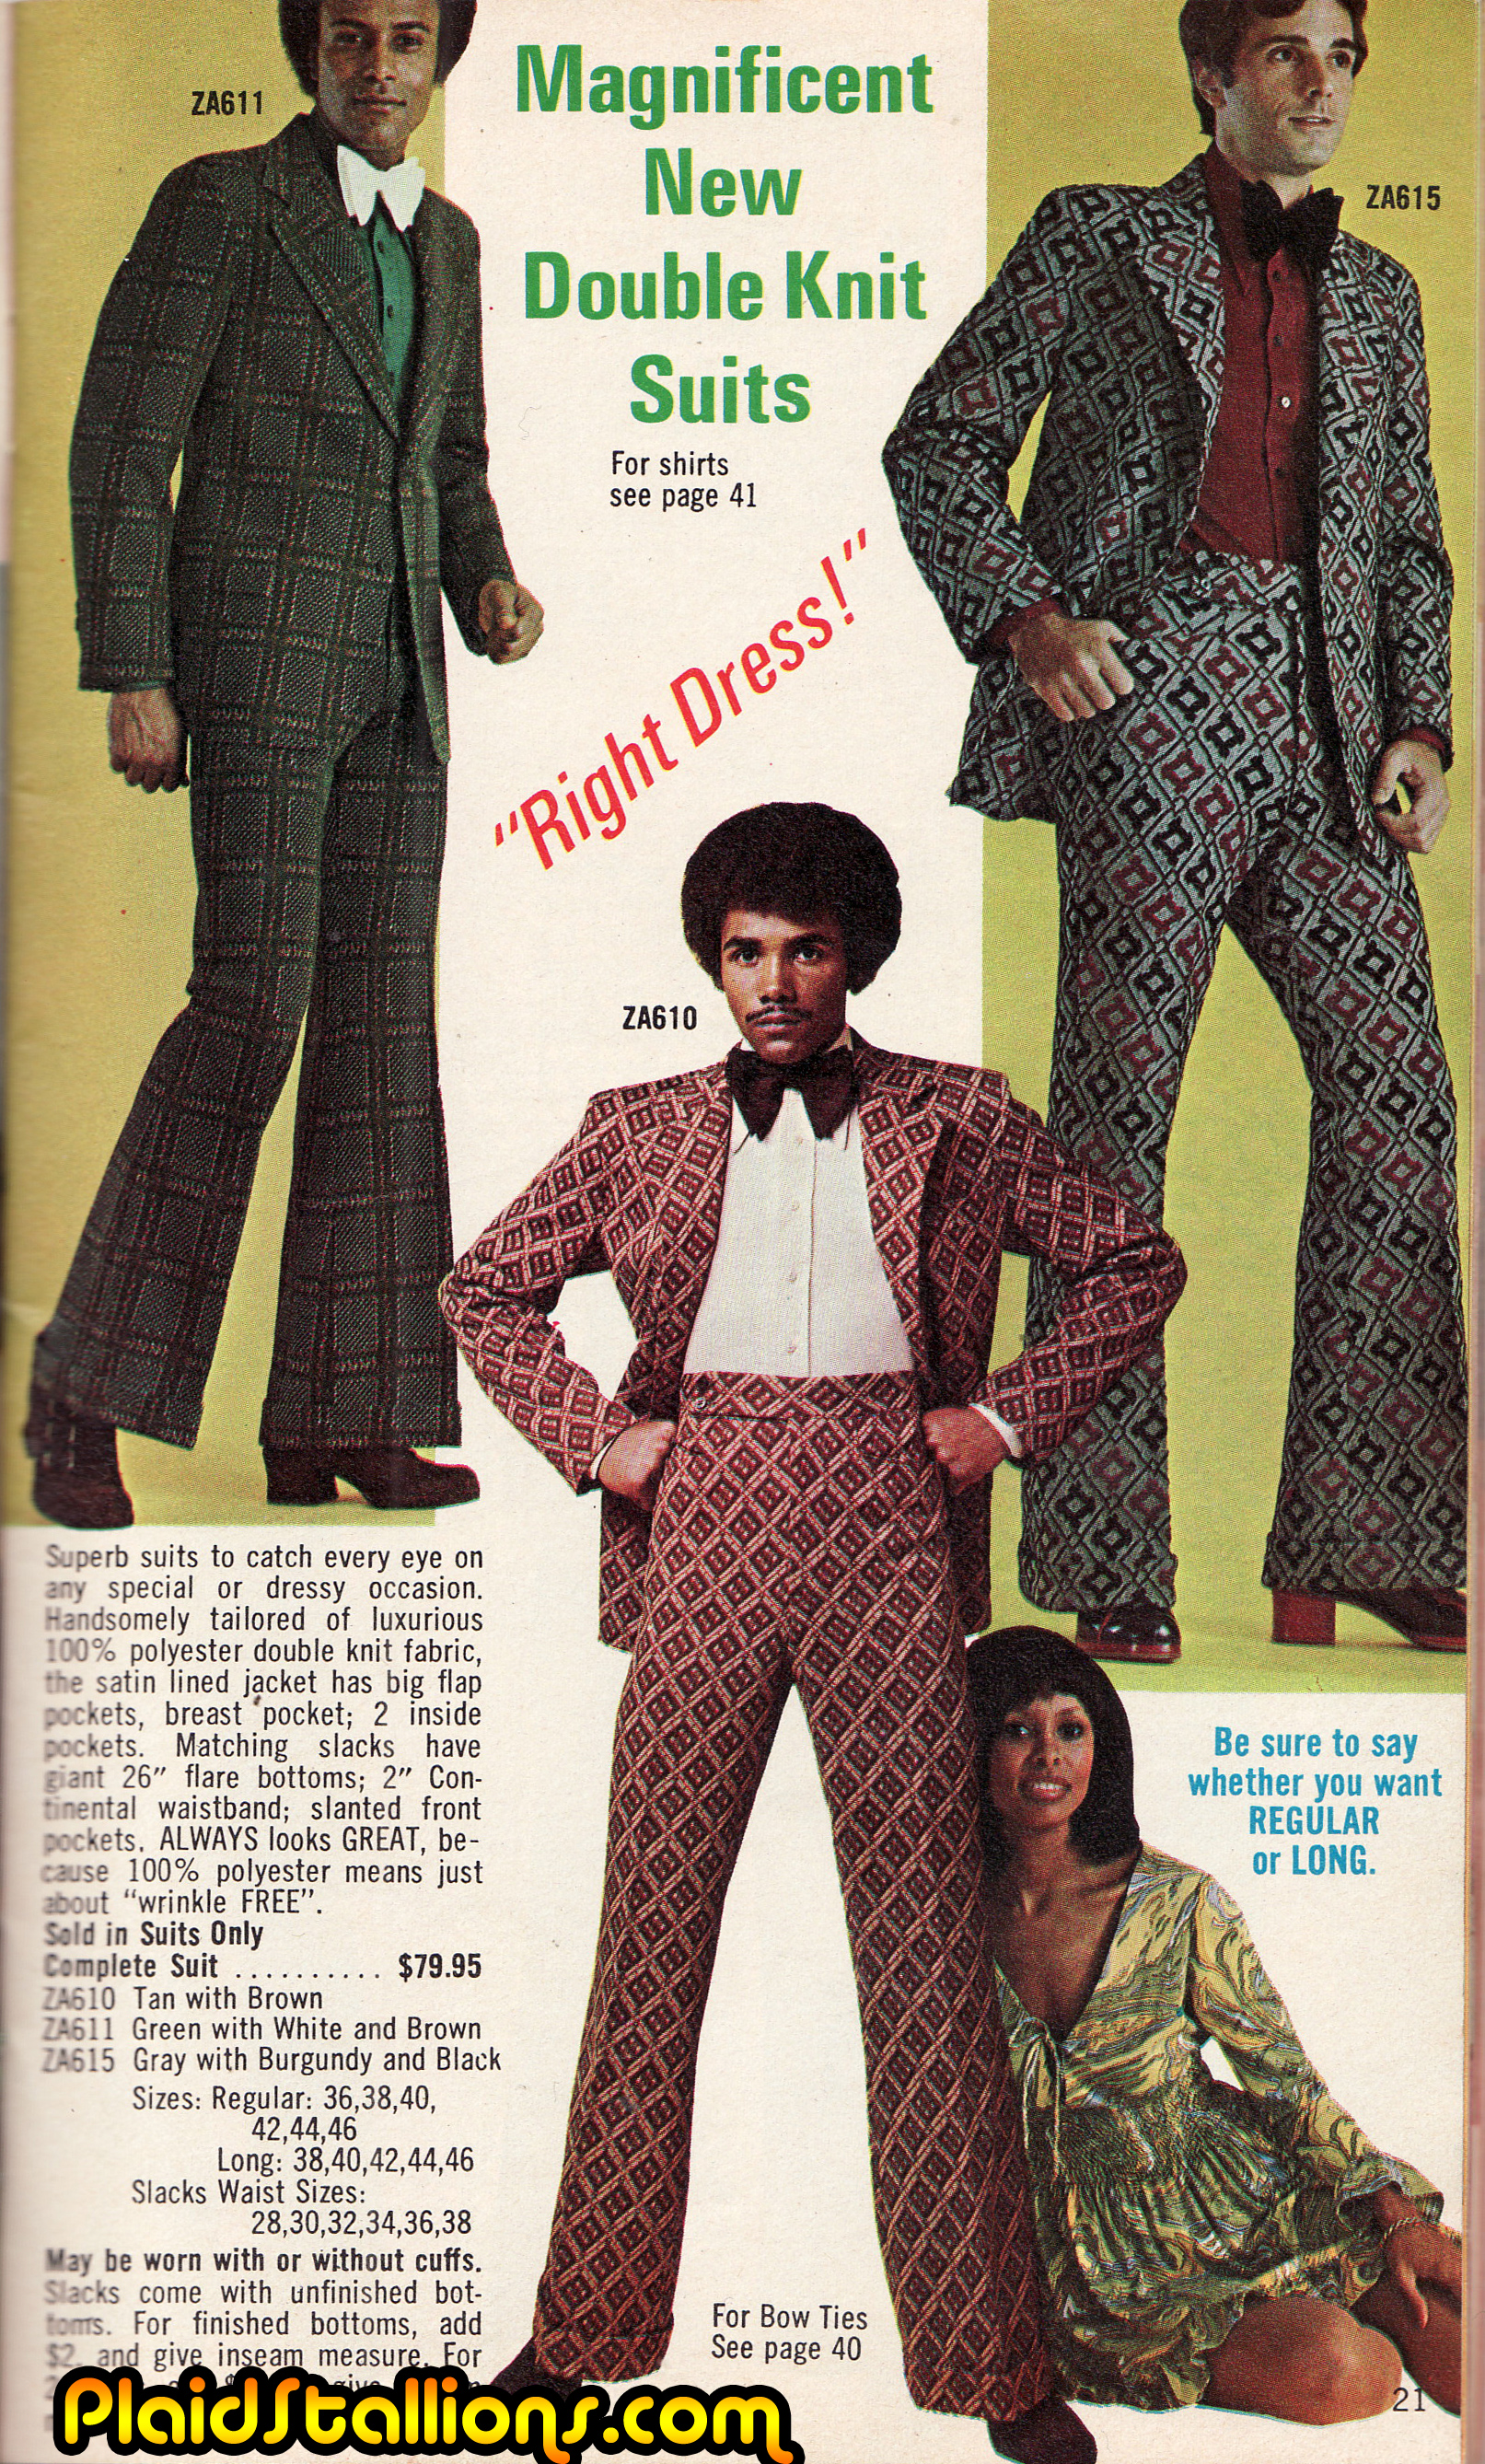 Plaid Stallions : Rambling and Reflections on '70s pop culture: Magnificent  New Double Knit Suits